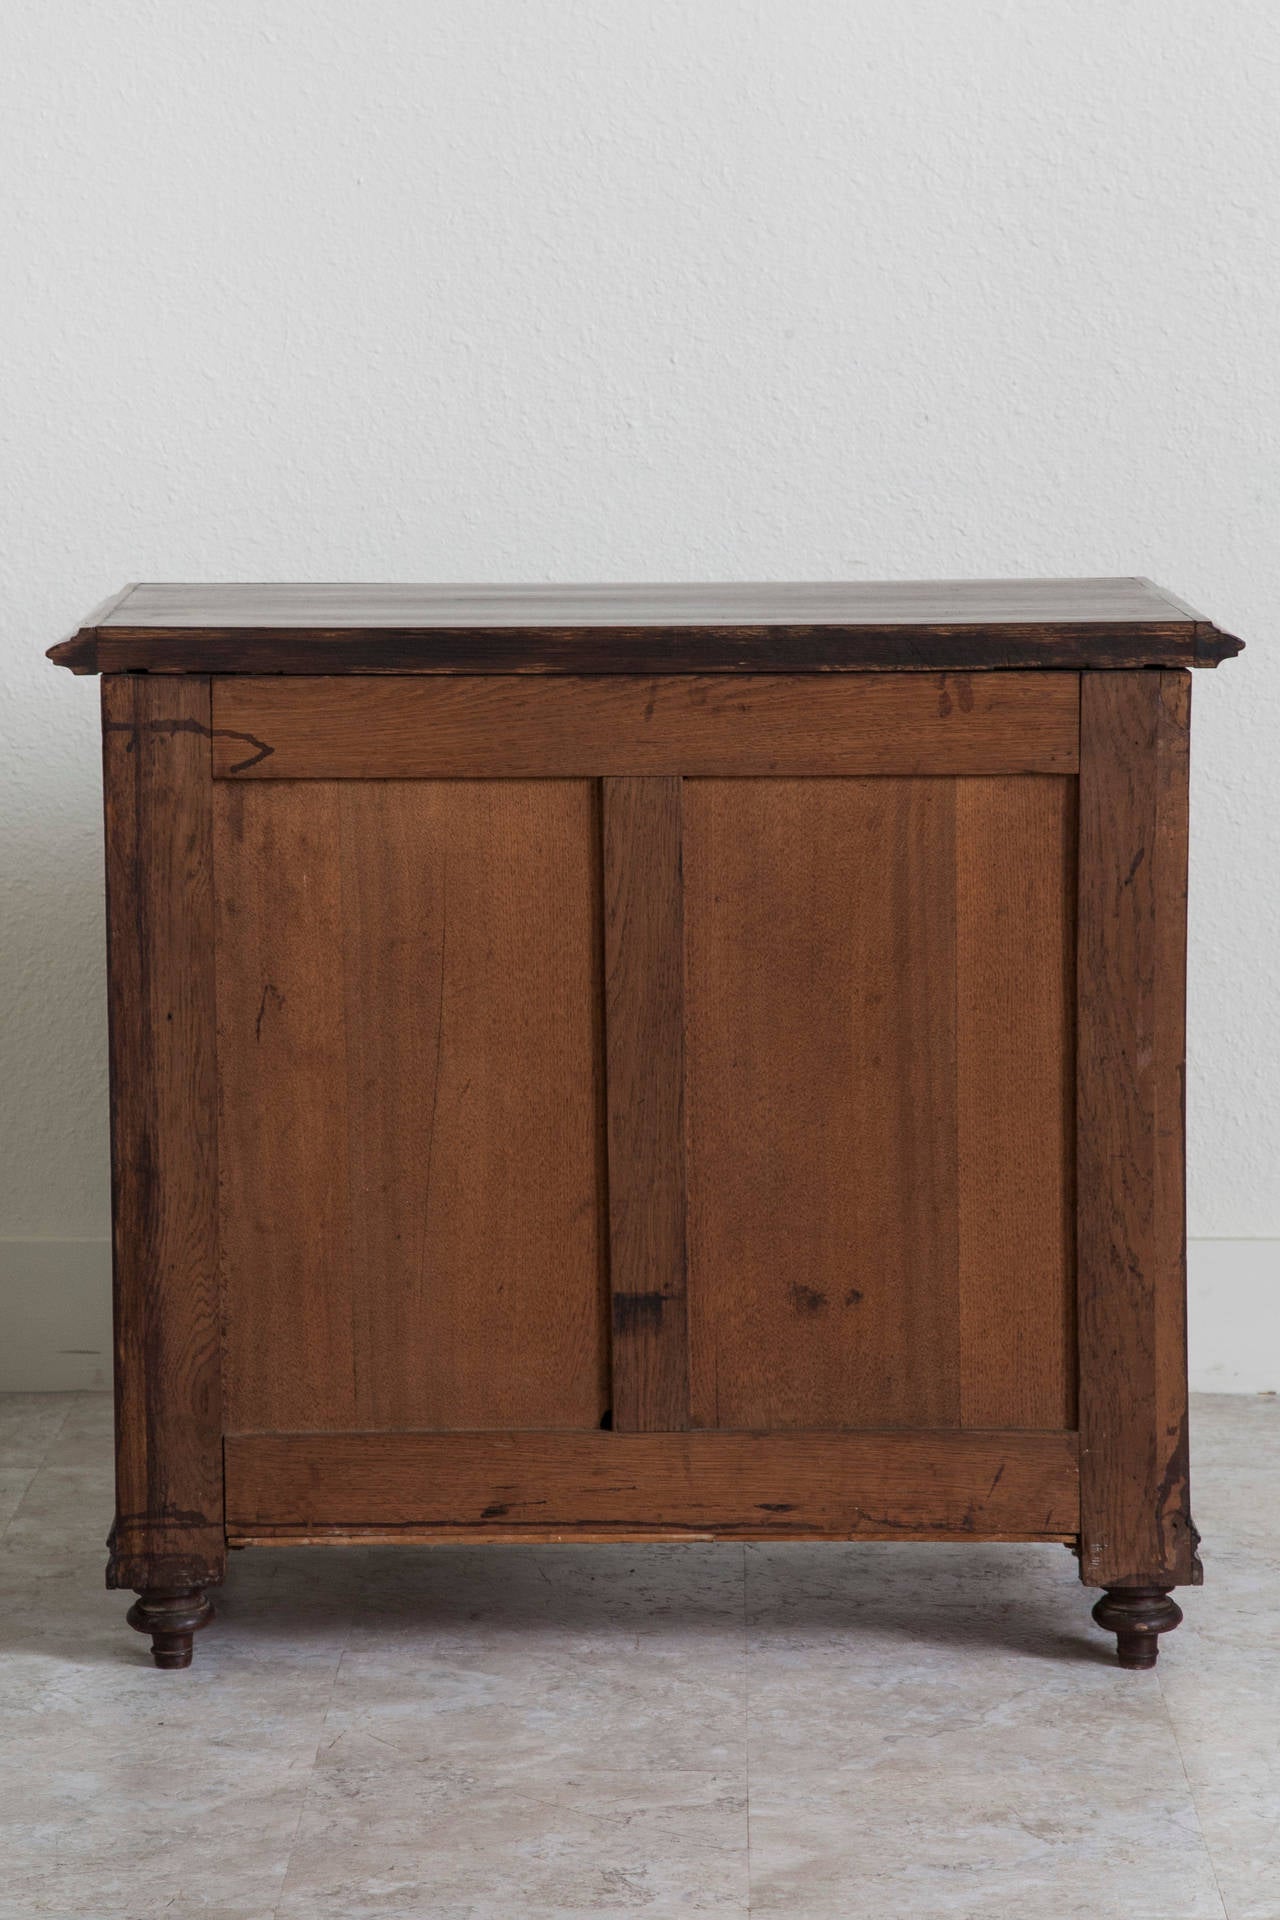 Walnut 19th Century French Small-Scale Chest or Commode with Fluted Columns